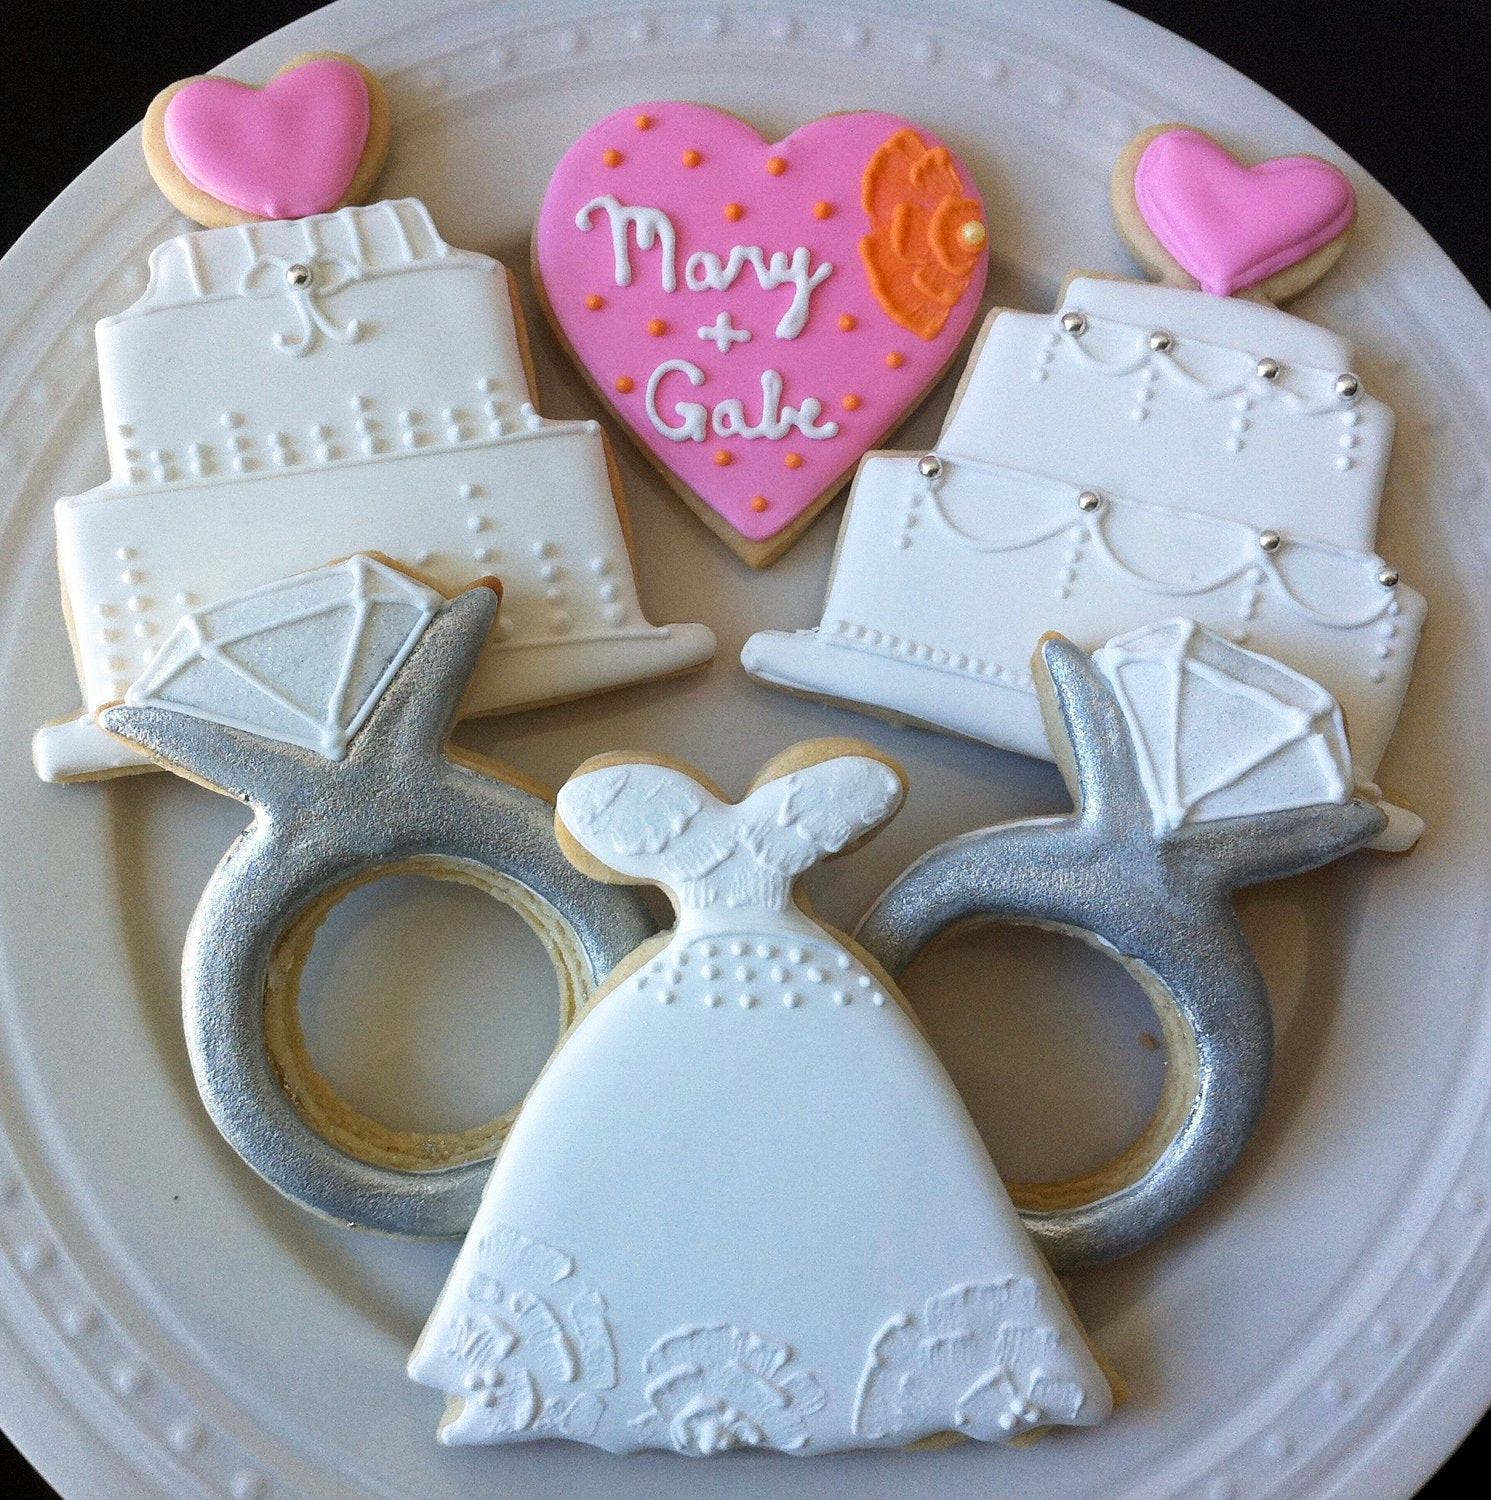 Decorated Wedding Cookies
 Decorated Wedding or Engagement Cookies by peapodscookies